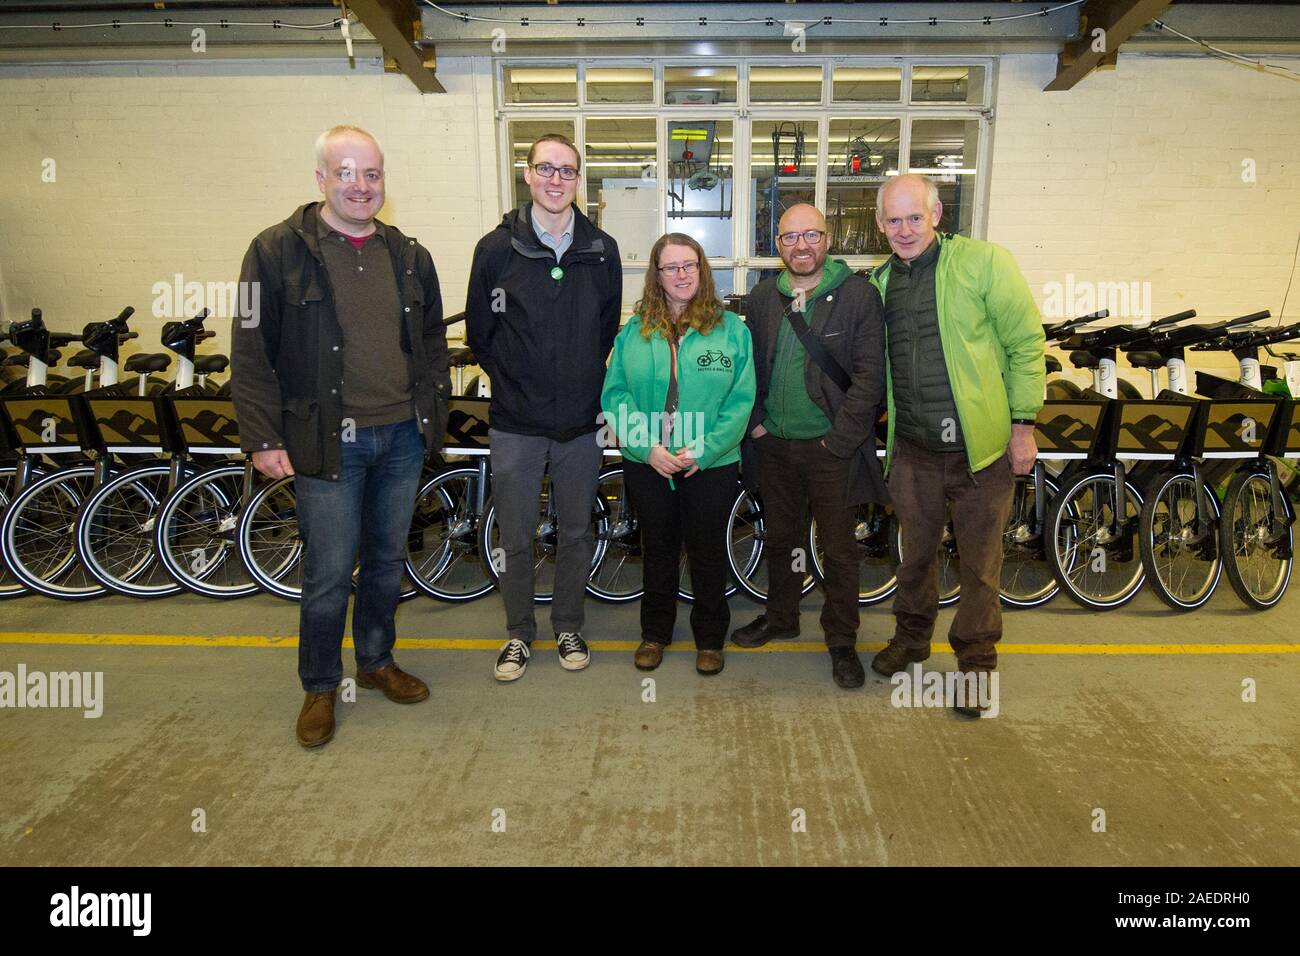 Glasgow, UK. 23 November 2019. Pictured: (L-R) Mark Ruskell MSP; Brian Quinn - Scottish Greens candidate for Stirling; Angela Barron - Director for Recyke-a-bike; Patrick Harvie MSP - Co Leader of the Scottish Green Party; Cllr Alasdair Tollemache - Scottish Greens coucillor for Stirling. Scottish Greens co-leader Patrick Harvie will join environment spokesperson Mark Ruskell MSP and Scottish Greens candidate for Stirling Bryan Quinn to repair some bicycles. Credit: Colin Fisher/Alamy Live News. Stock Photo